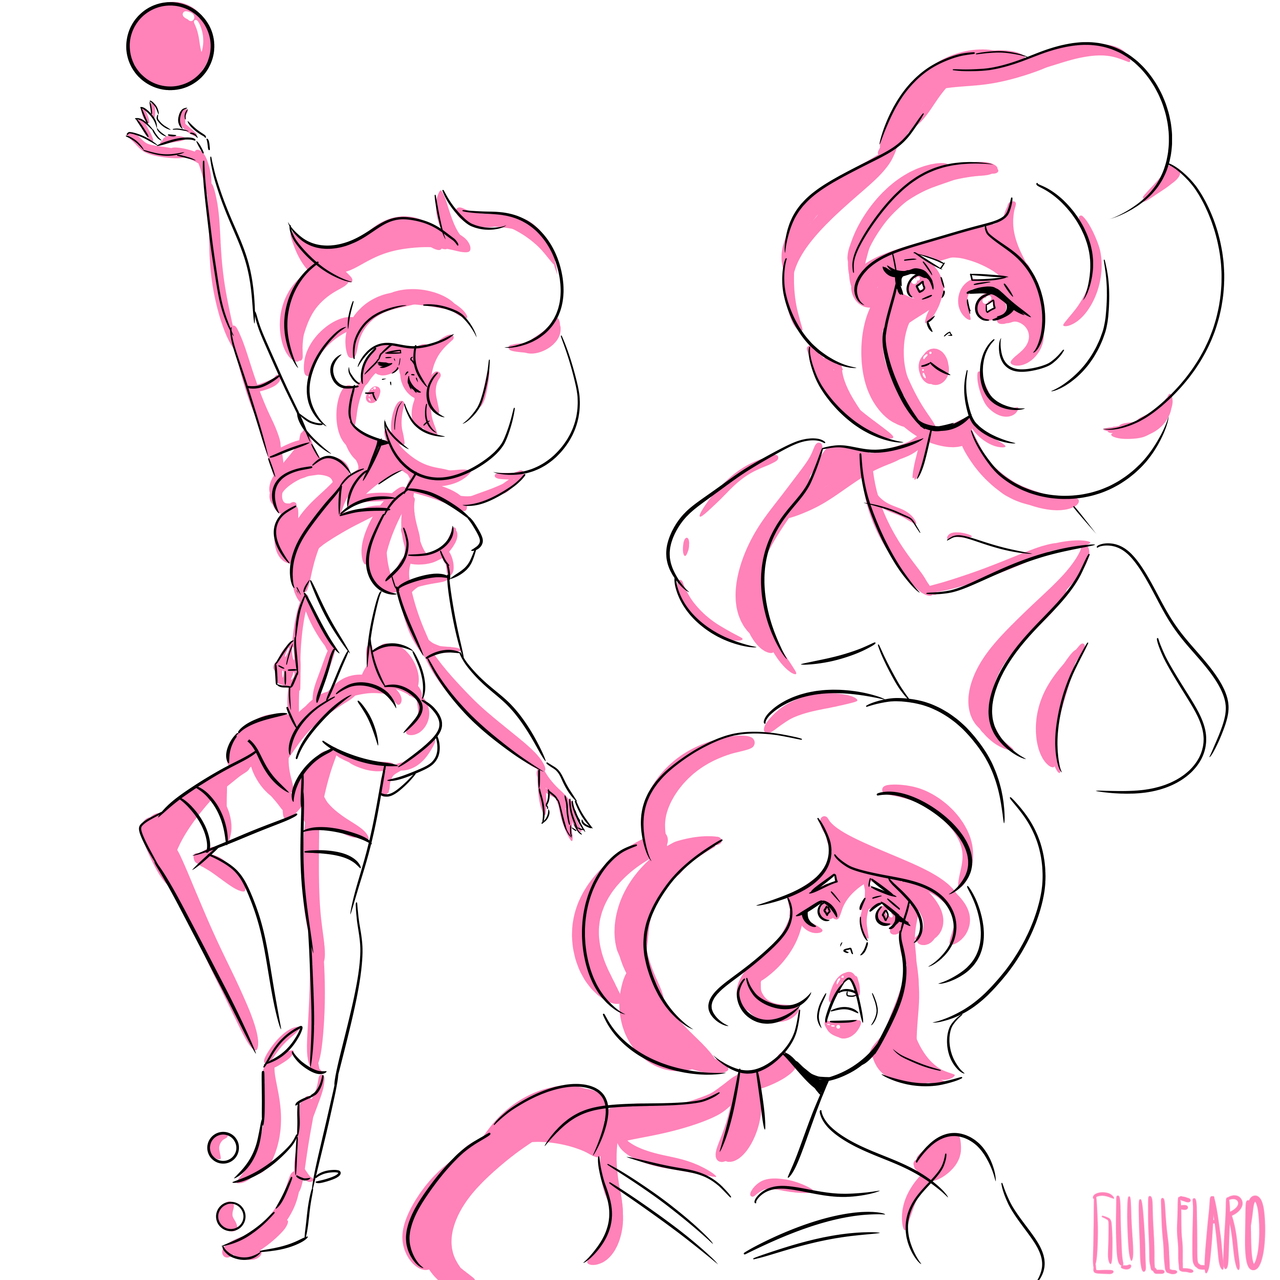 A quick sketch of Pink Diamond, maybe I’ll finish it later Instagram: @guillelaro.art